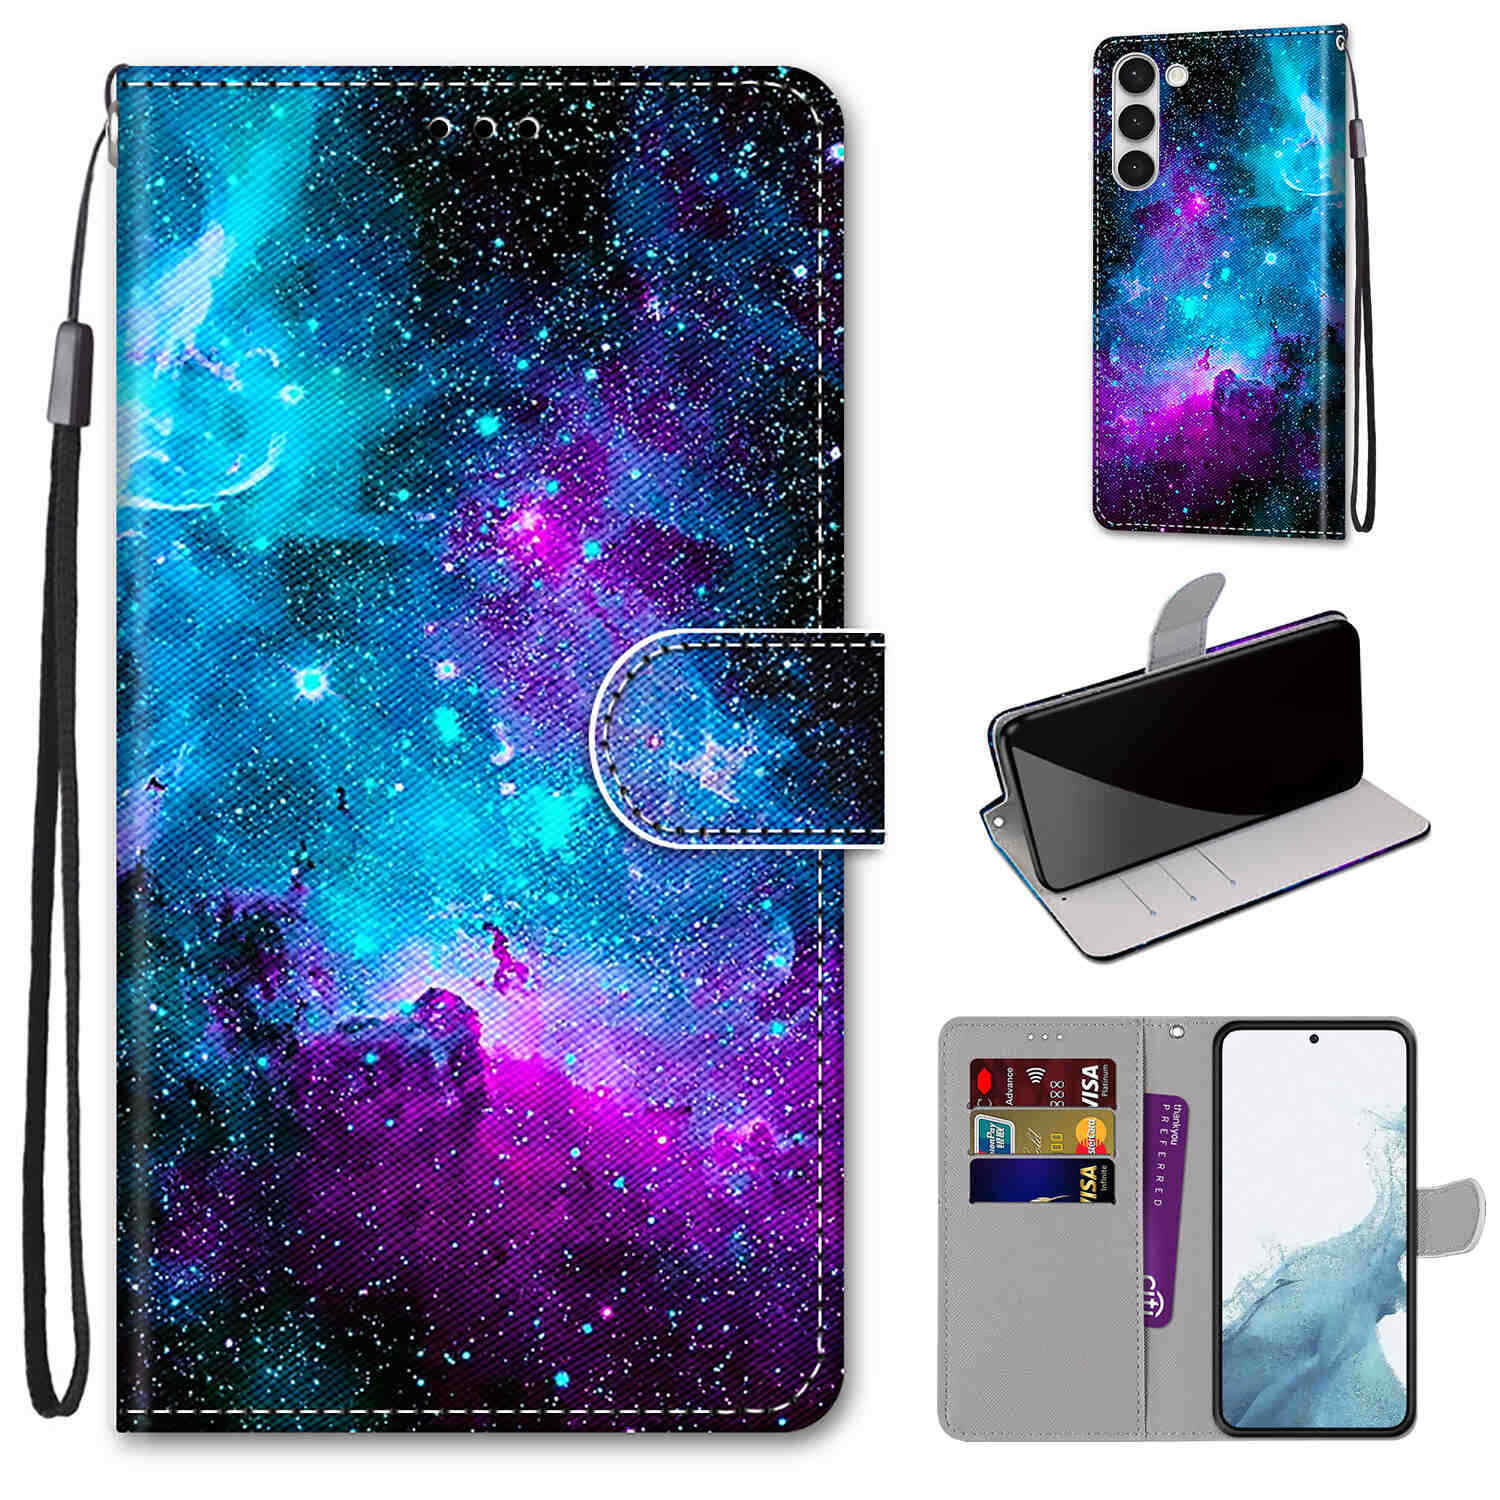 Universe Wallet Phone Case For iPhone Huawei Google Sony OPPO ZTE Xiaomi Samsung